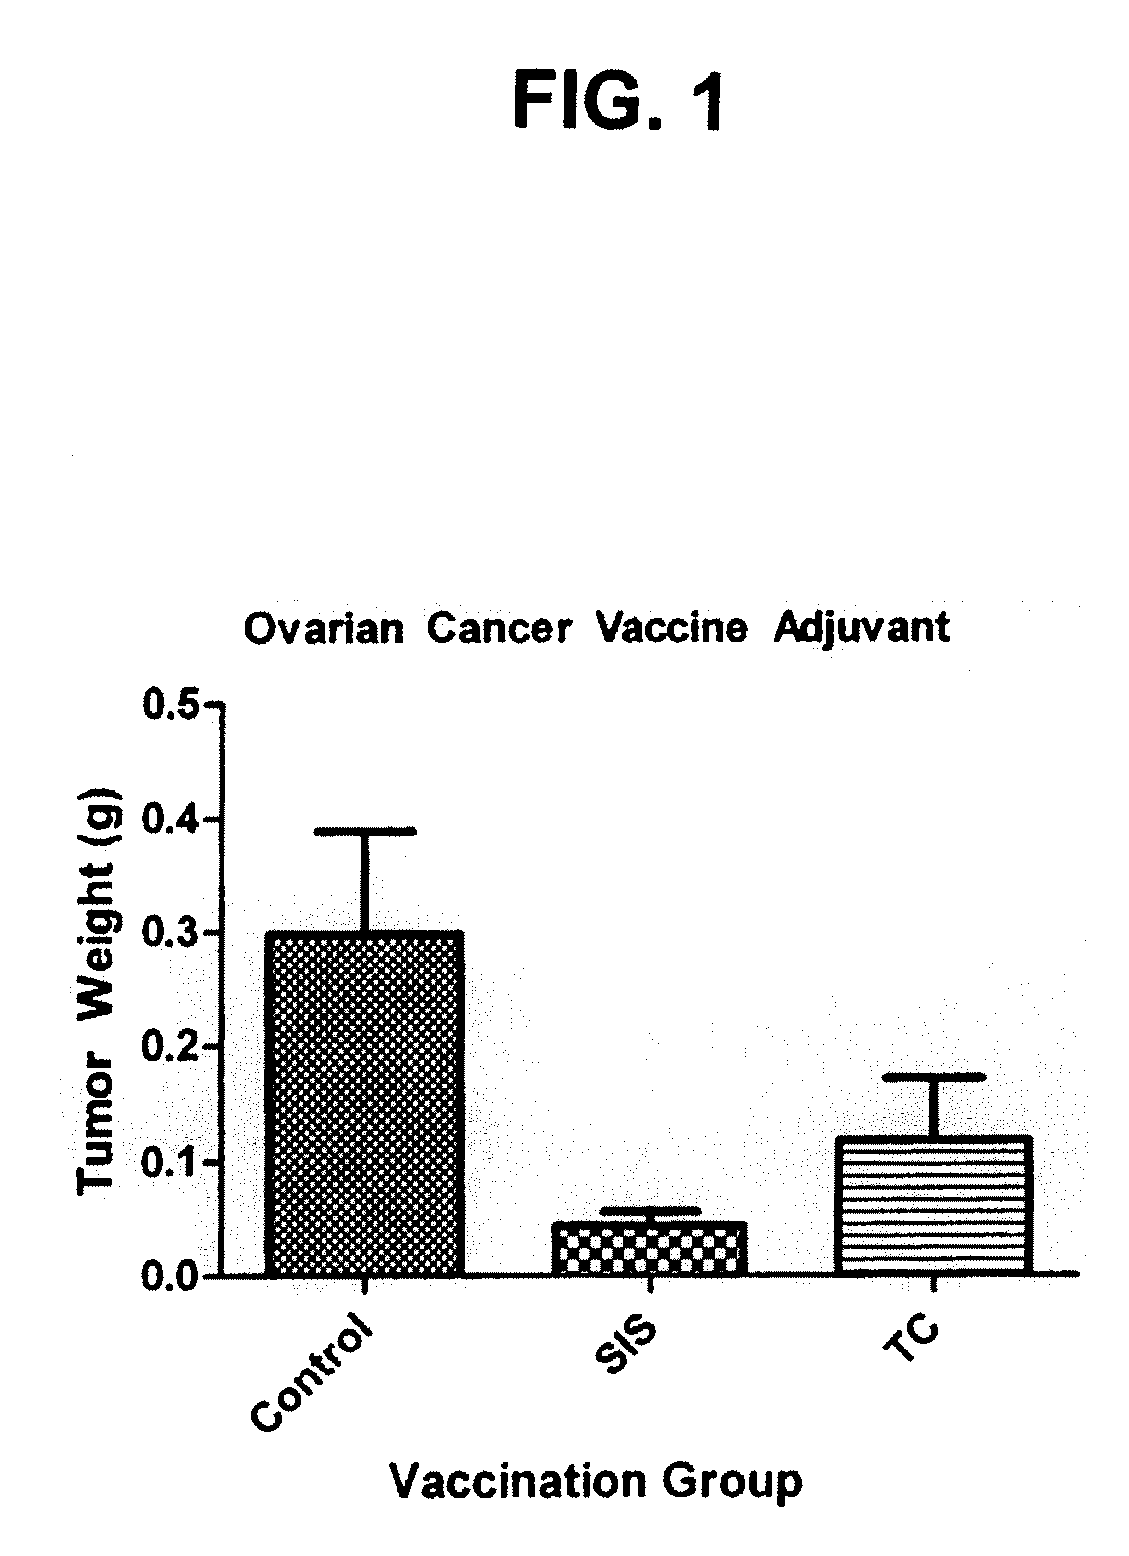 Extracellular matrix adjuvant & methods for prevention and/or inhibition of ovarian tumors and ovarian cancer